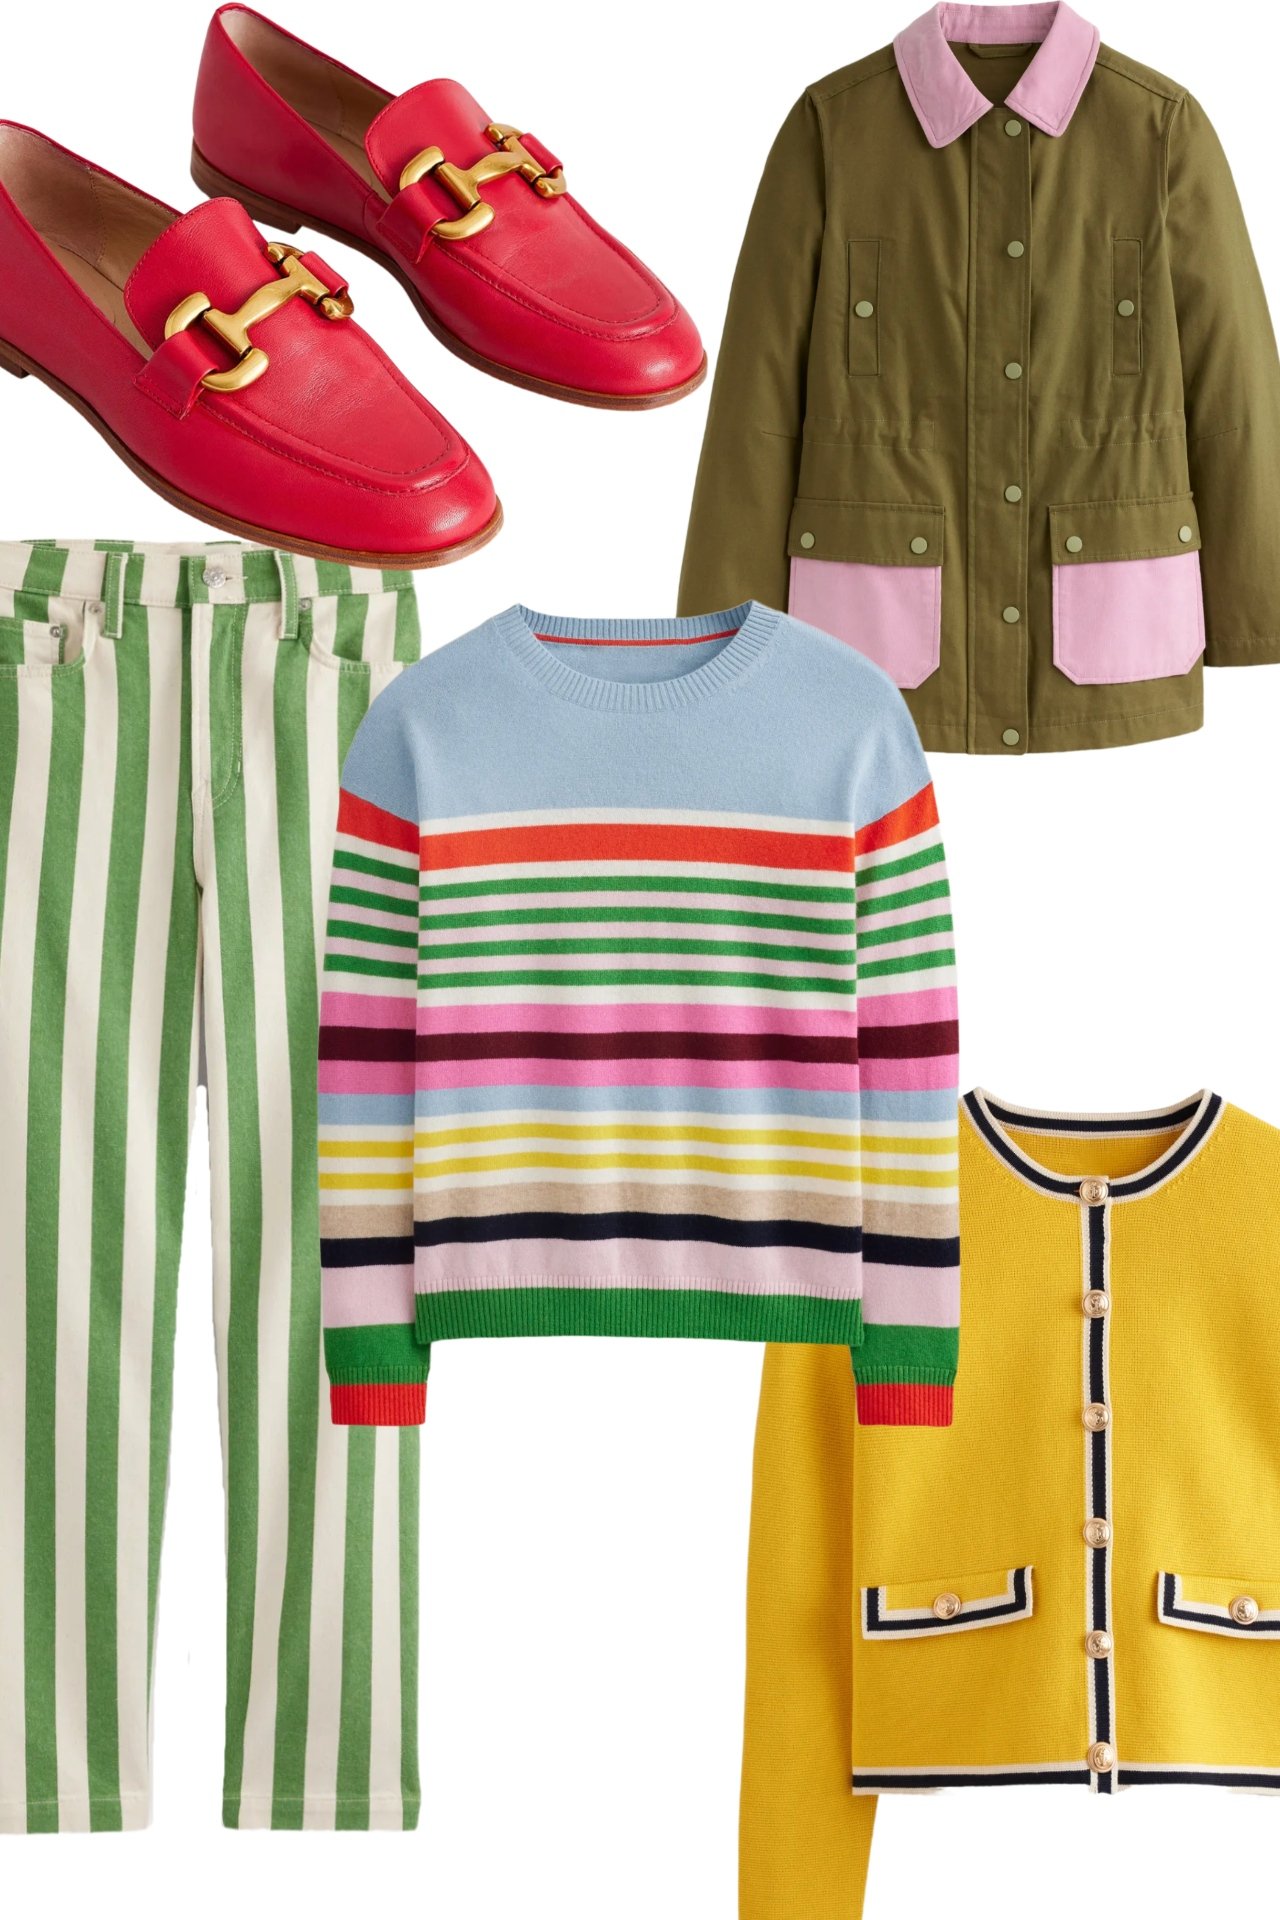 boden red loafer, color blocked utility jacket, striped denim, rainbow cashmere sweater, yellow tipped cardigan